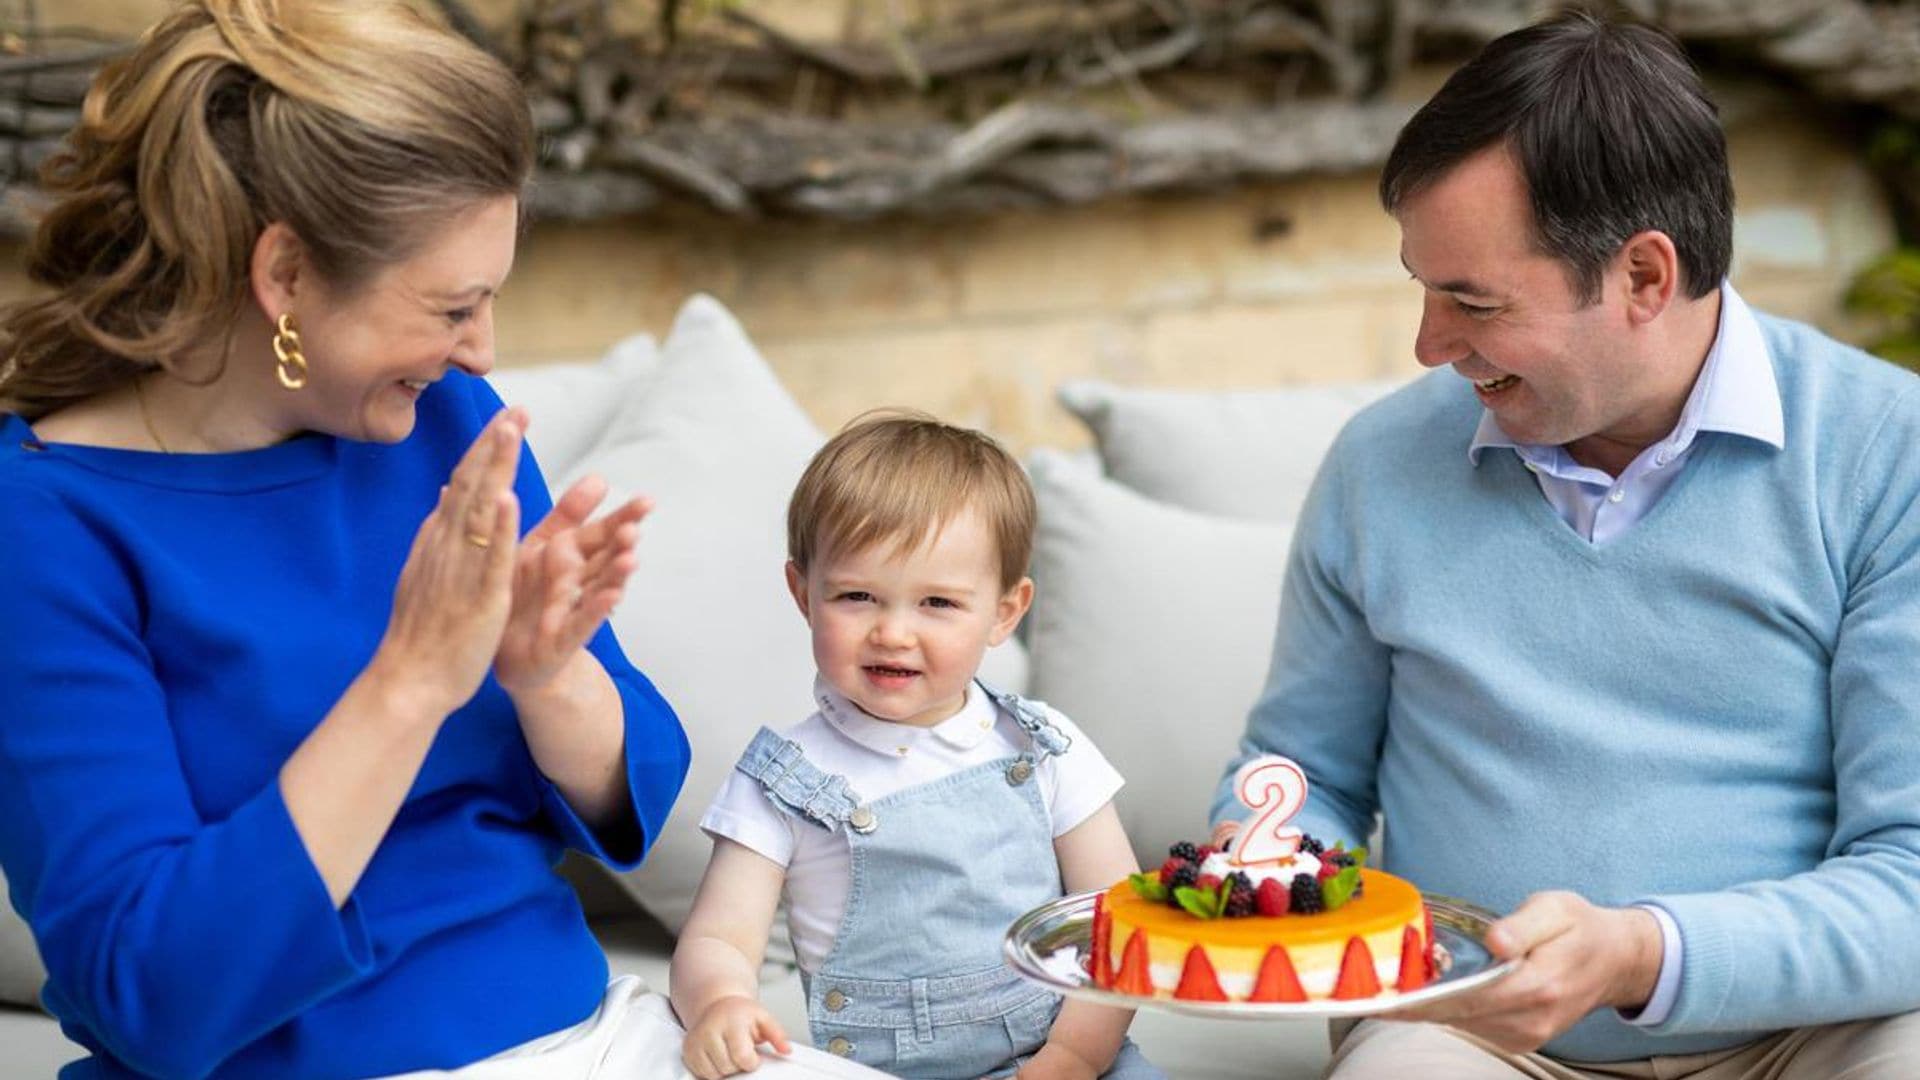 Prince Charles of Luxembourg celebrates 2nd birthday with new adorable photos